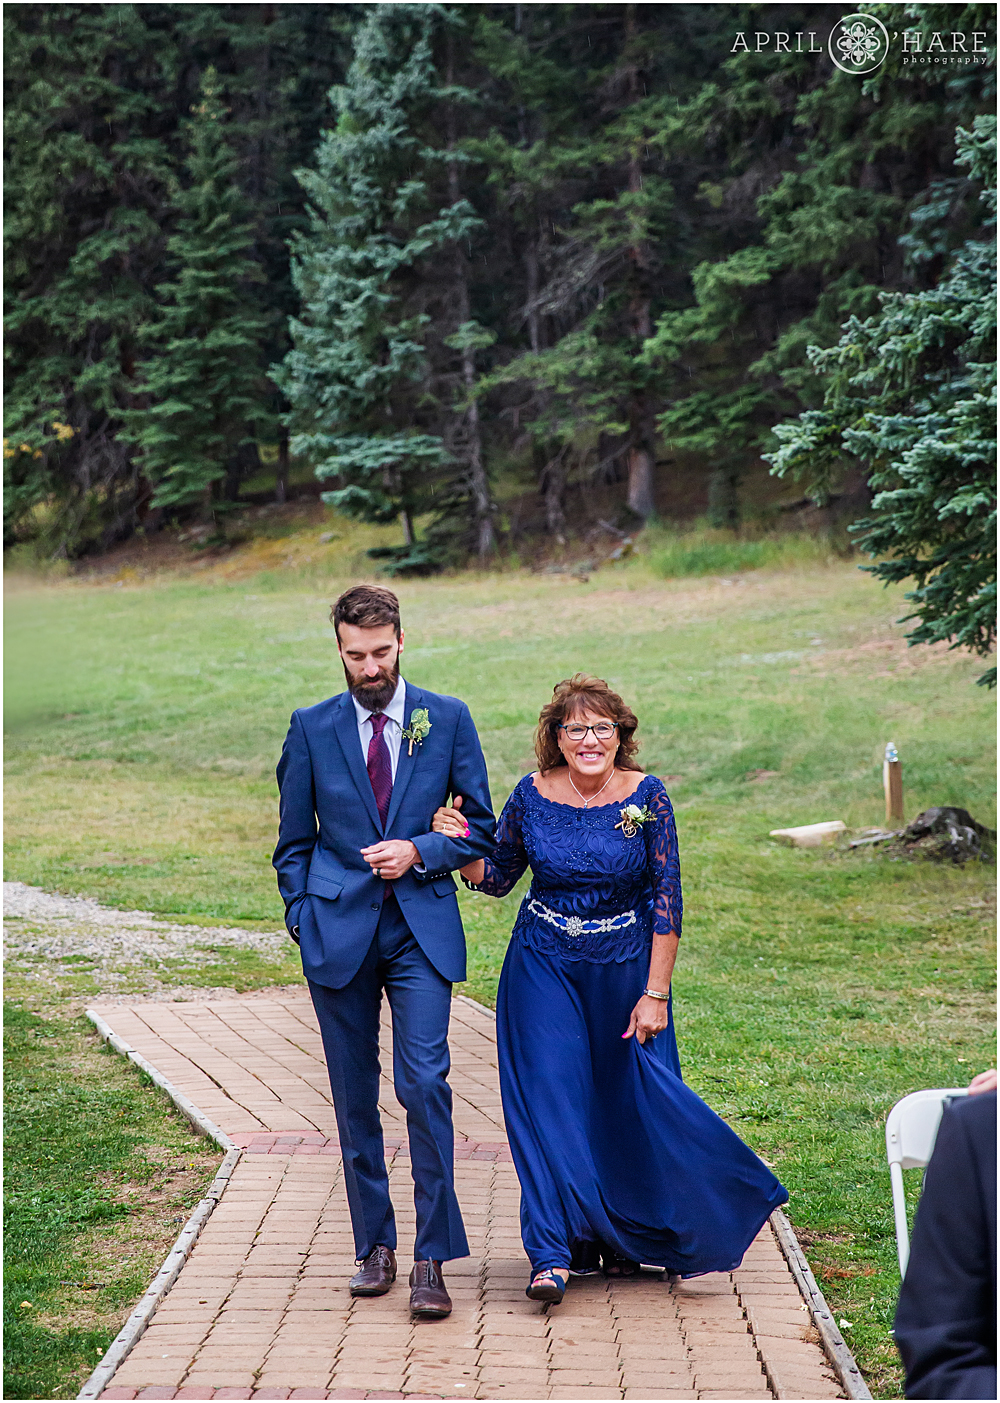 Mother of the bride walks down the aisle with her son at an outdoor Colorado wedding on a stormy summer day